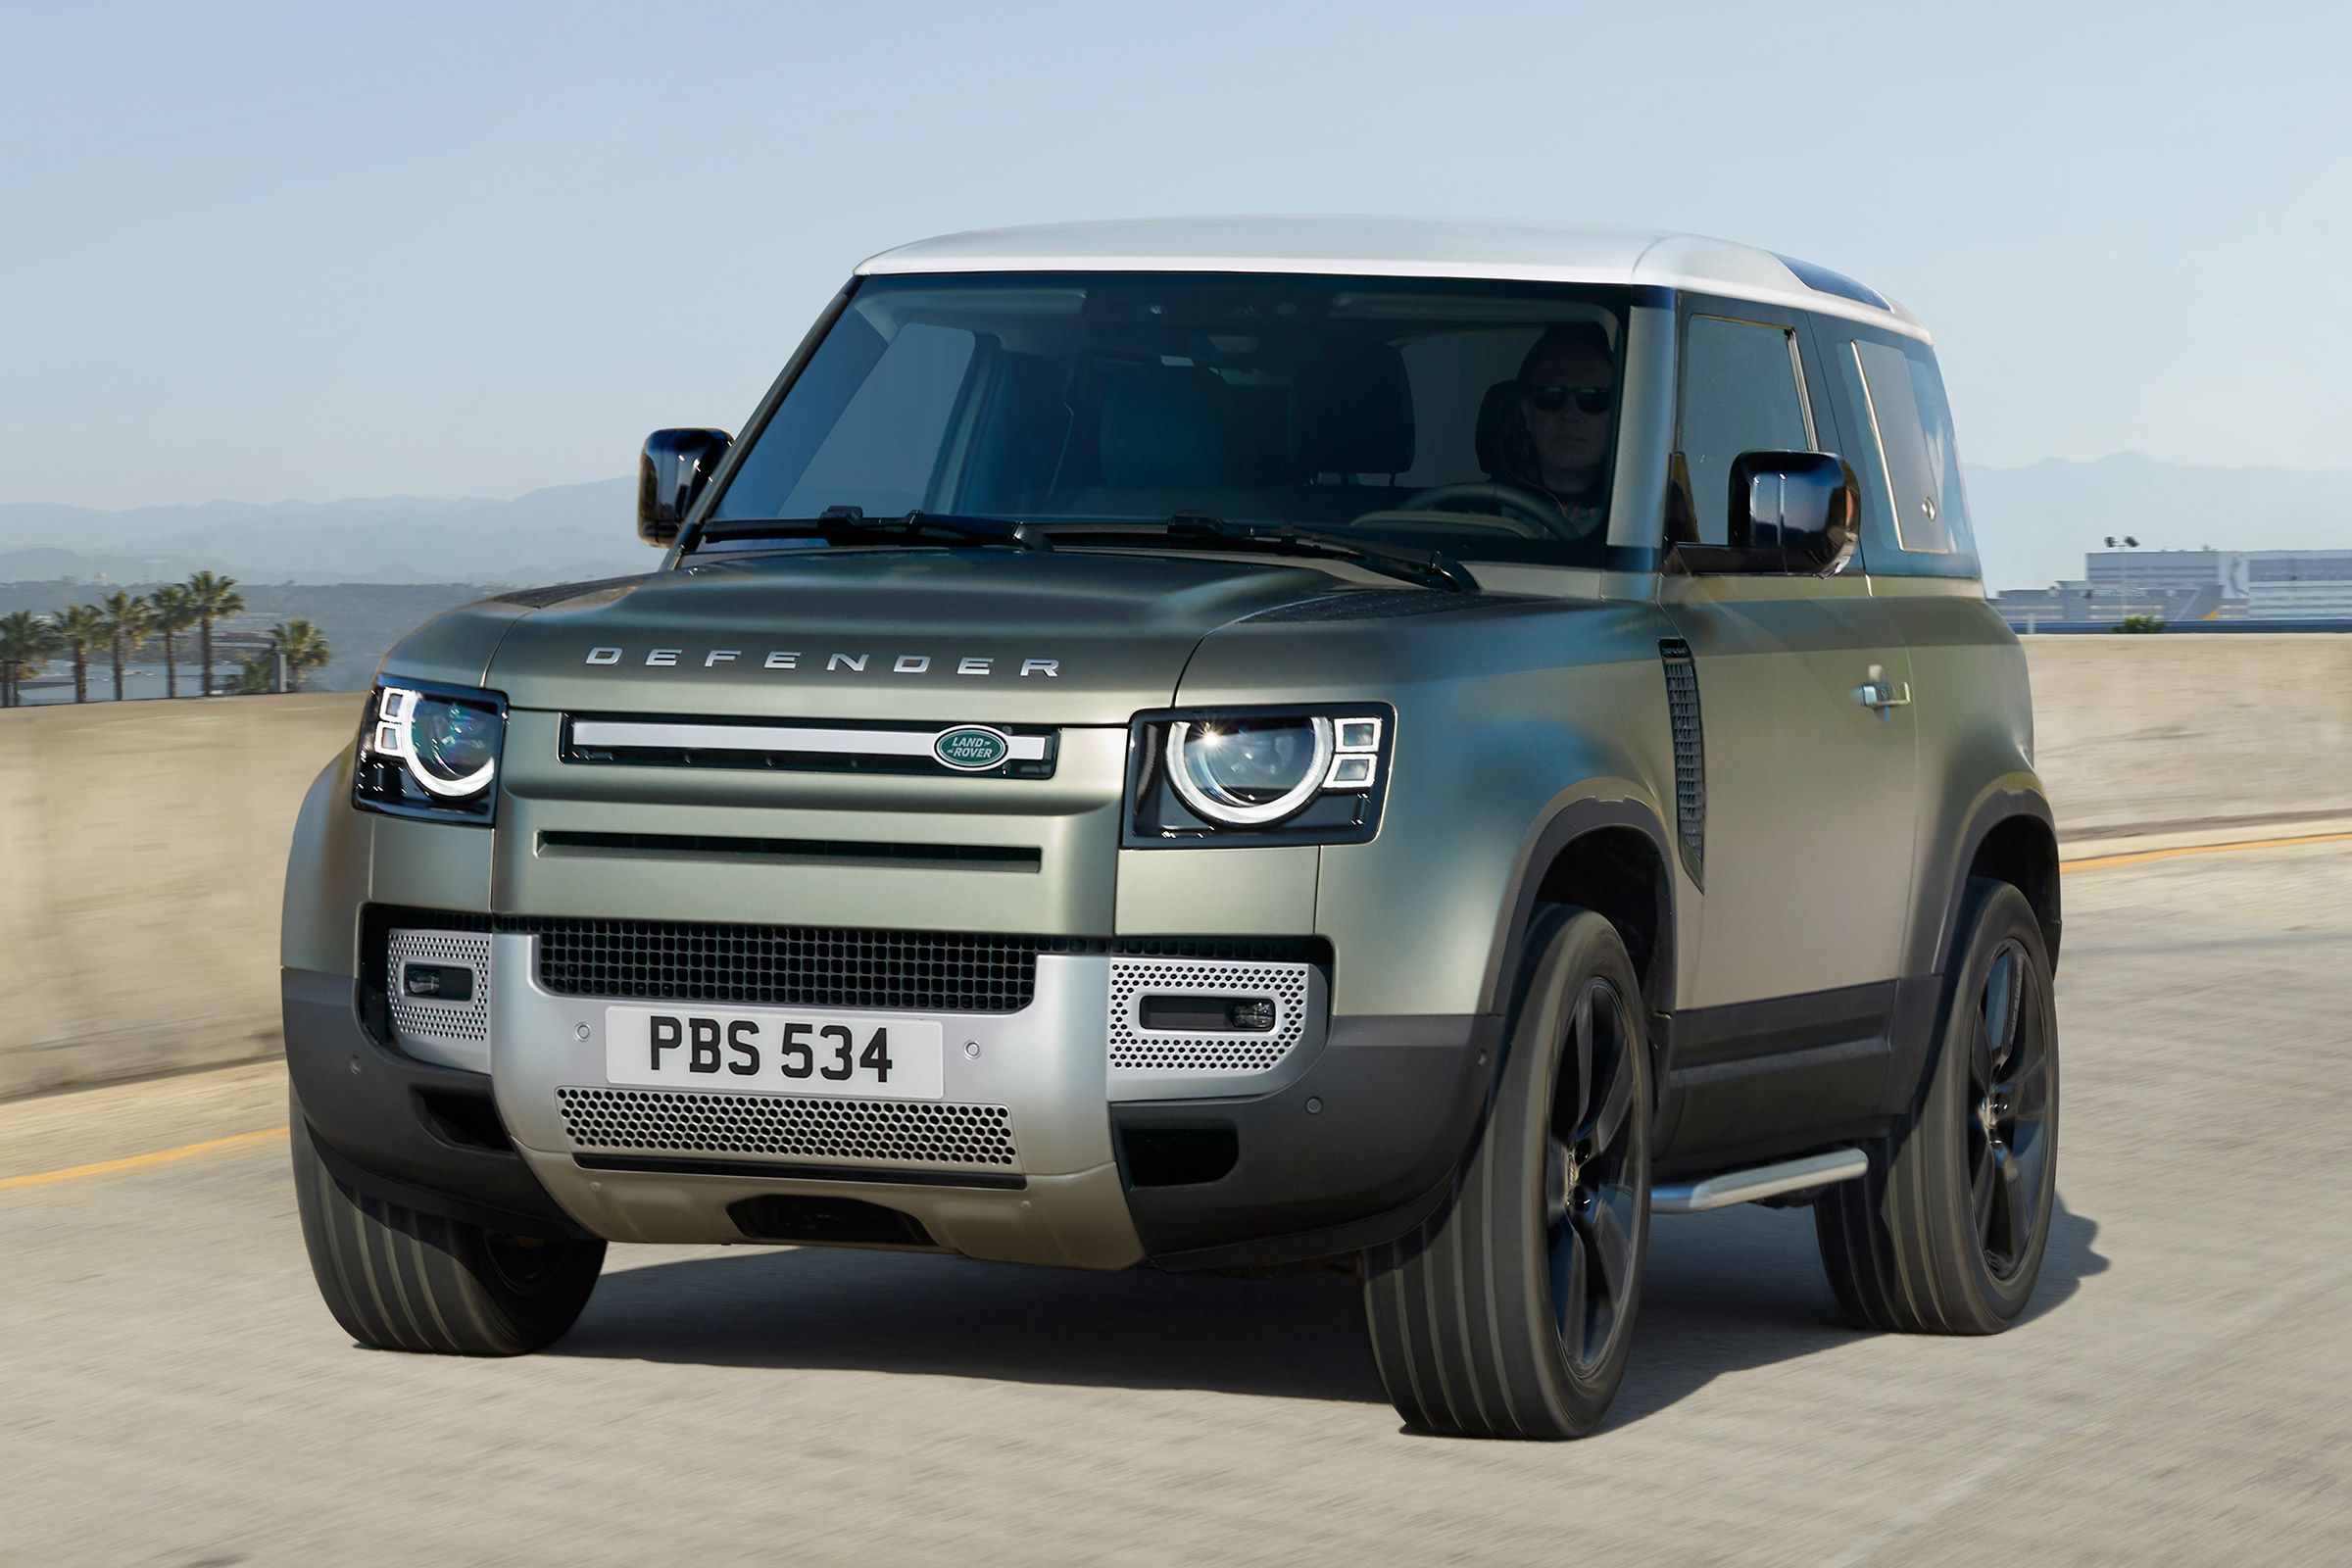 The Land Rover Defender – Built For Any Terrain - The Market Herald